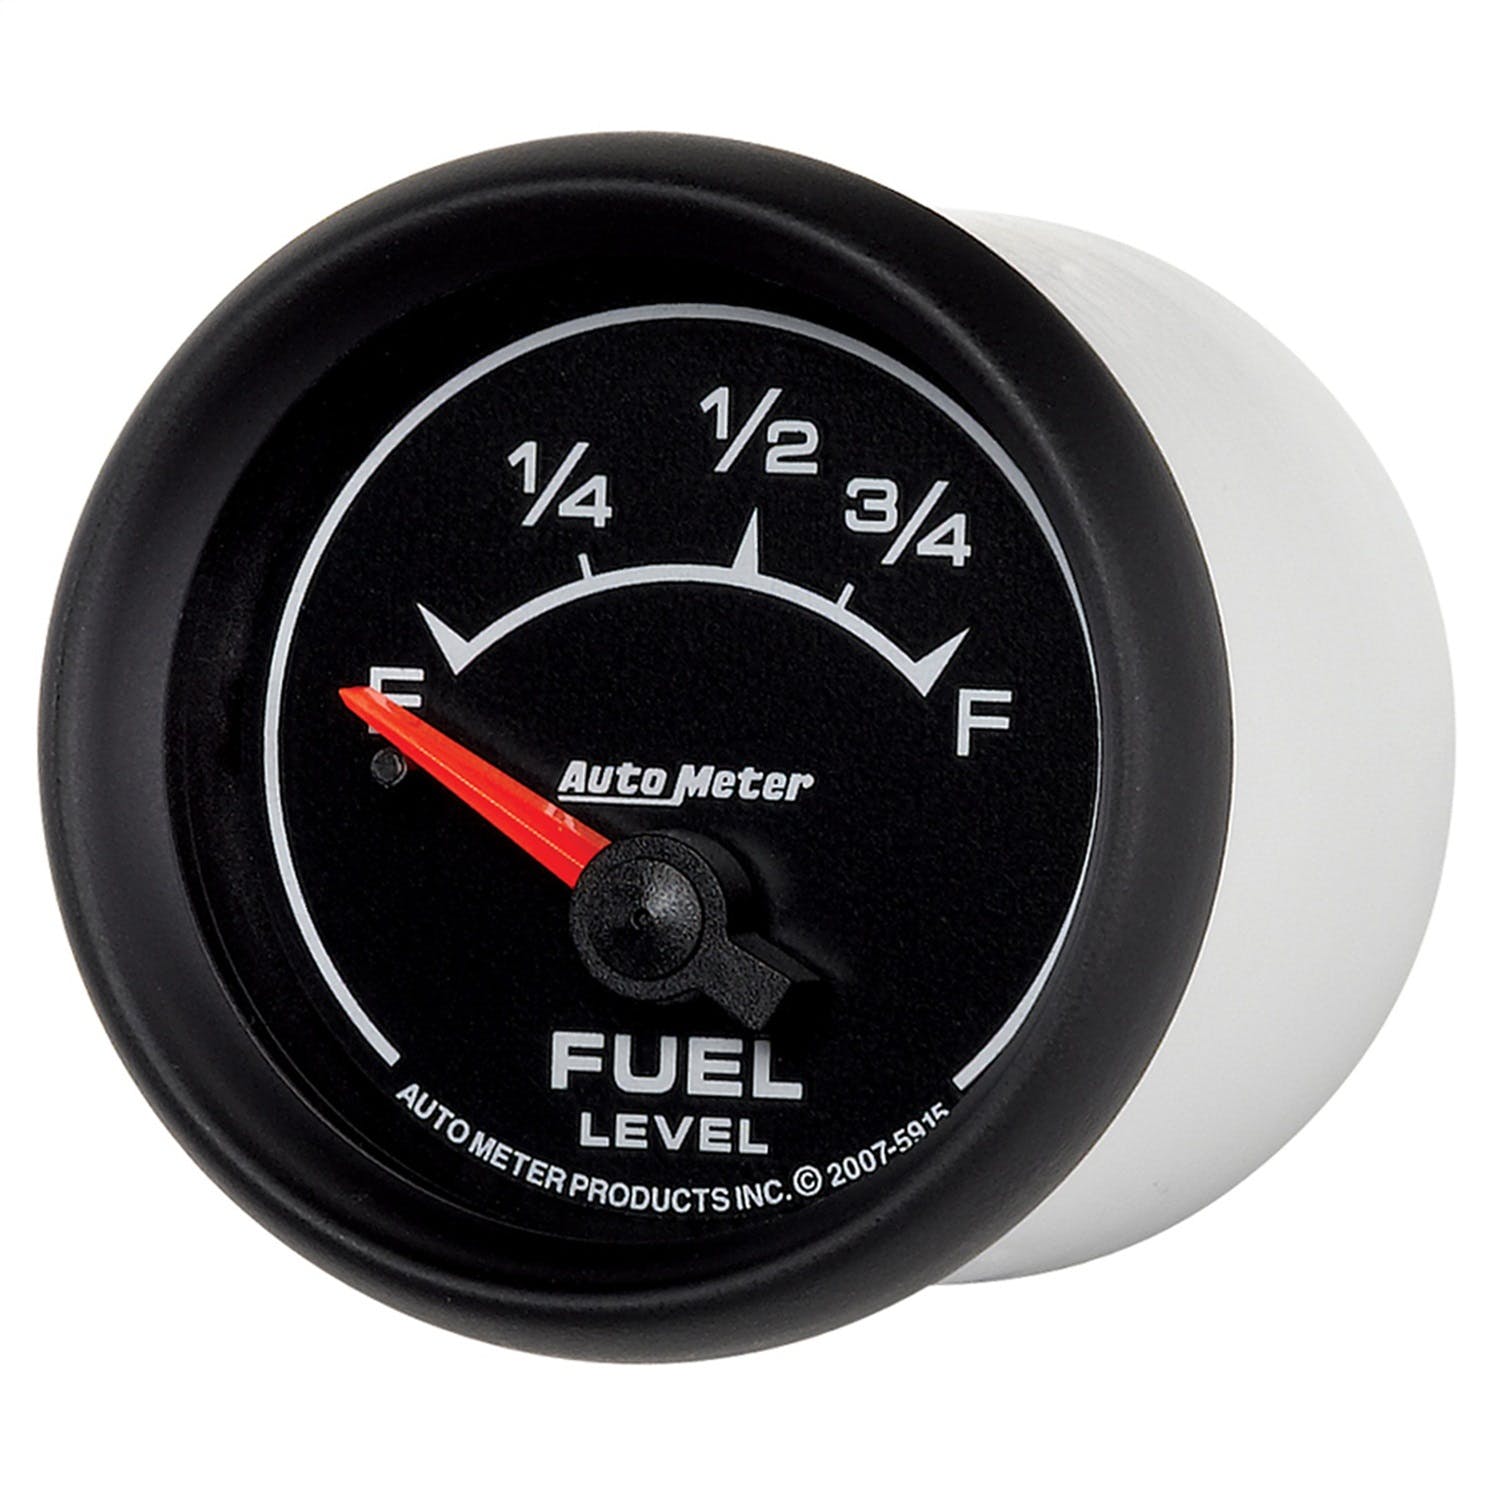 AutoMeter Products 5915 2-1/16in Fuel Leve , 73-10 ohms Electric